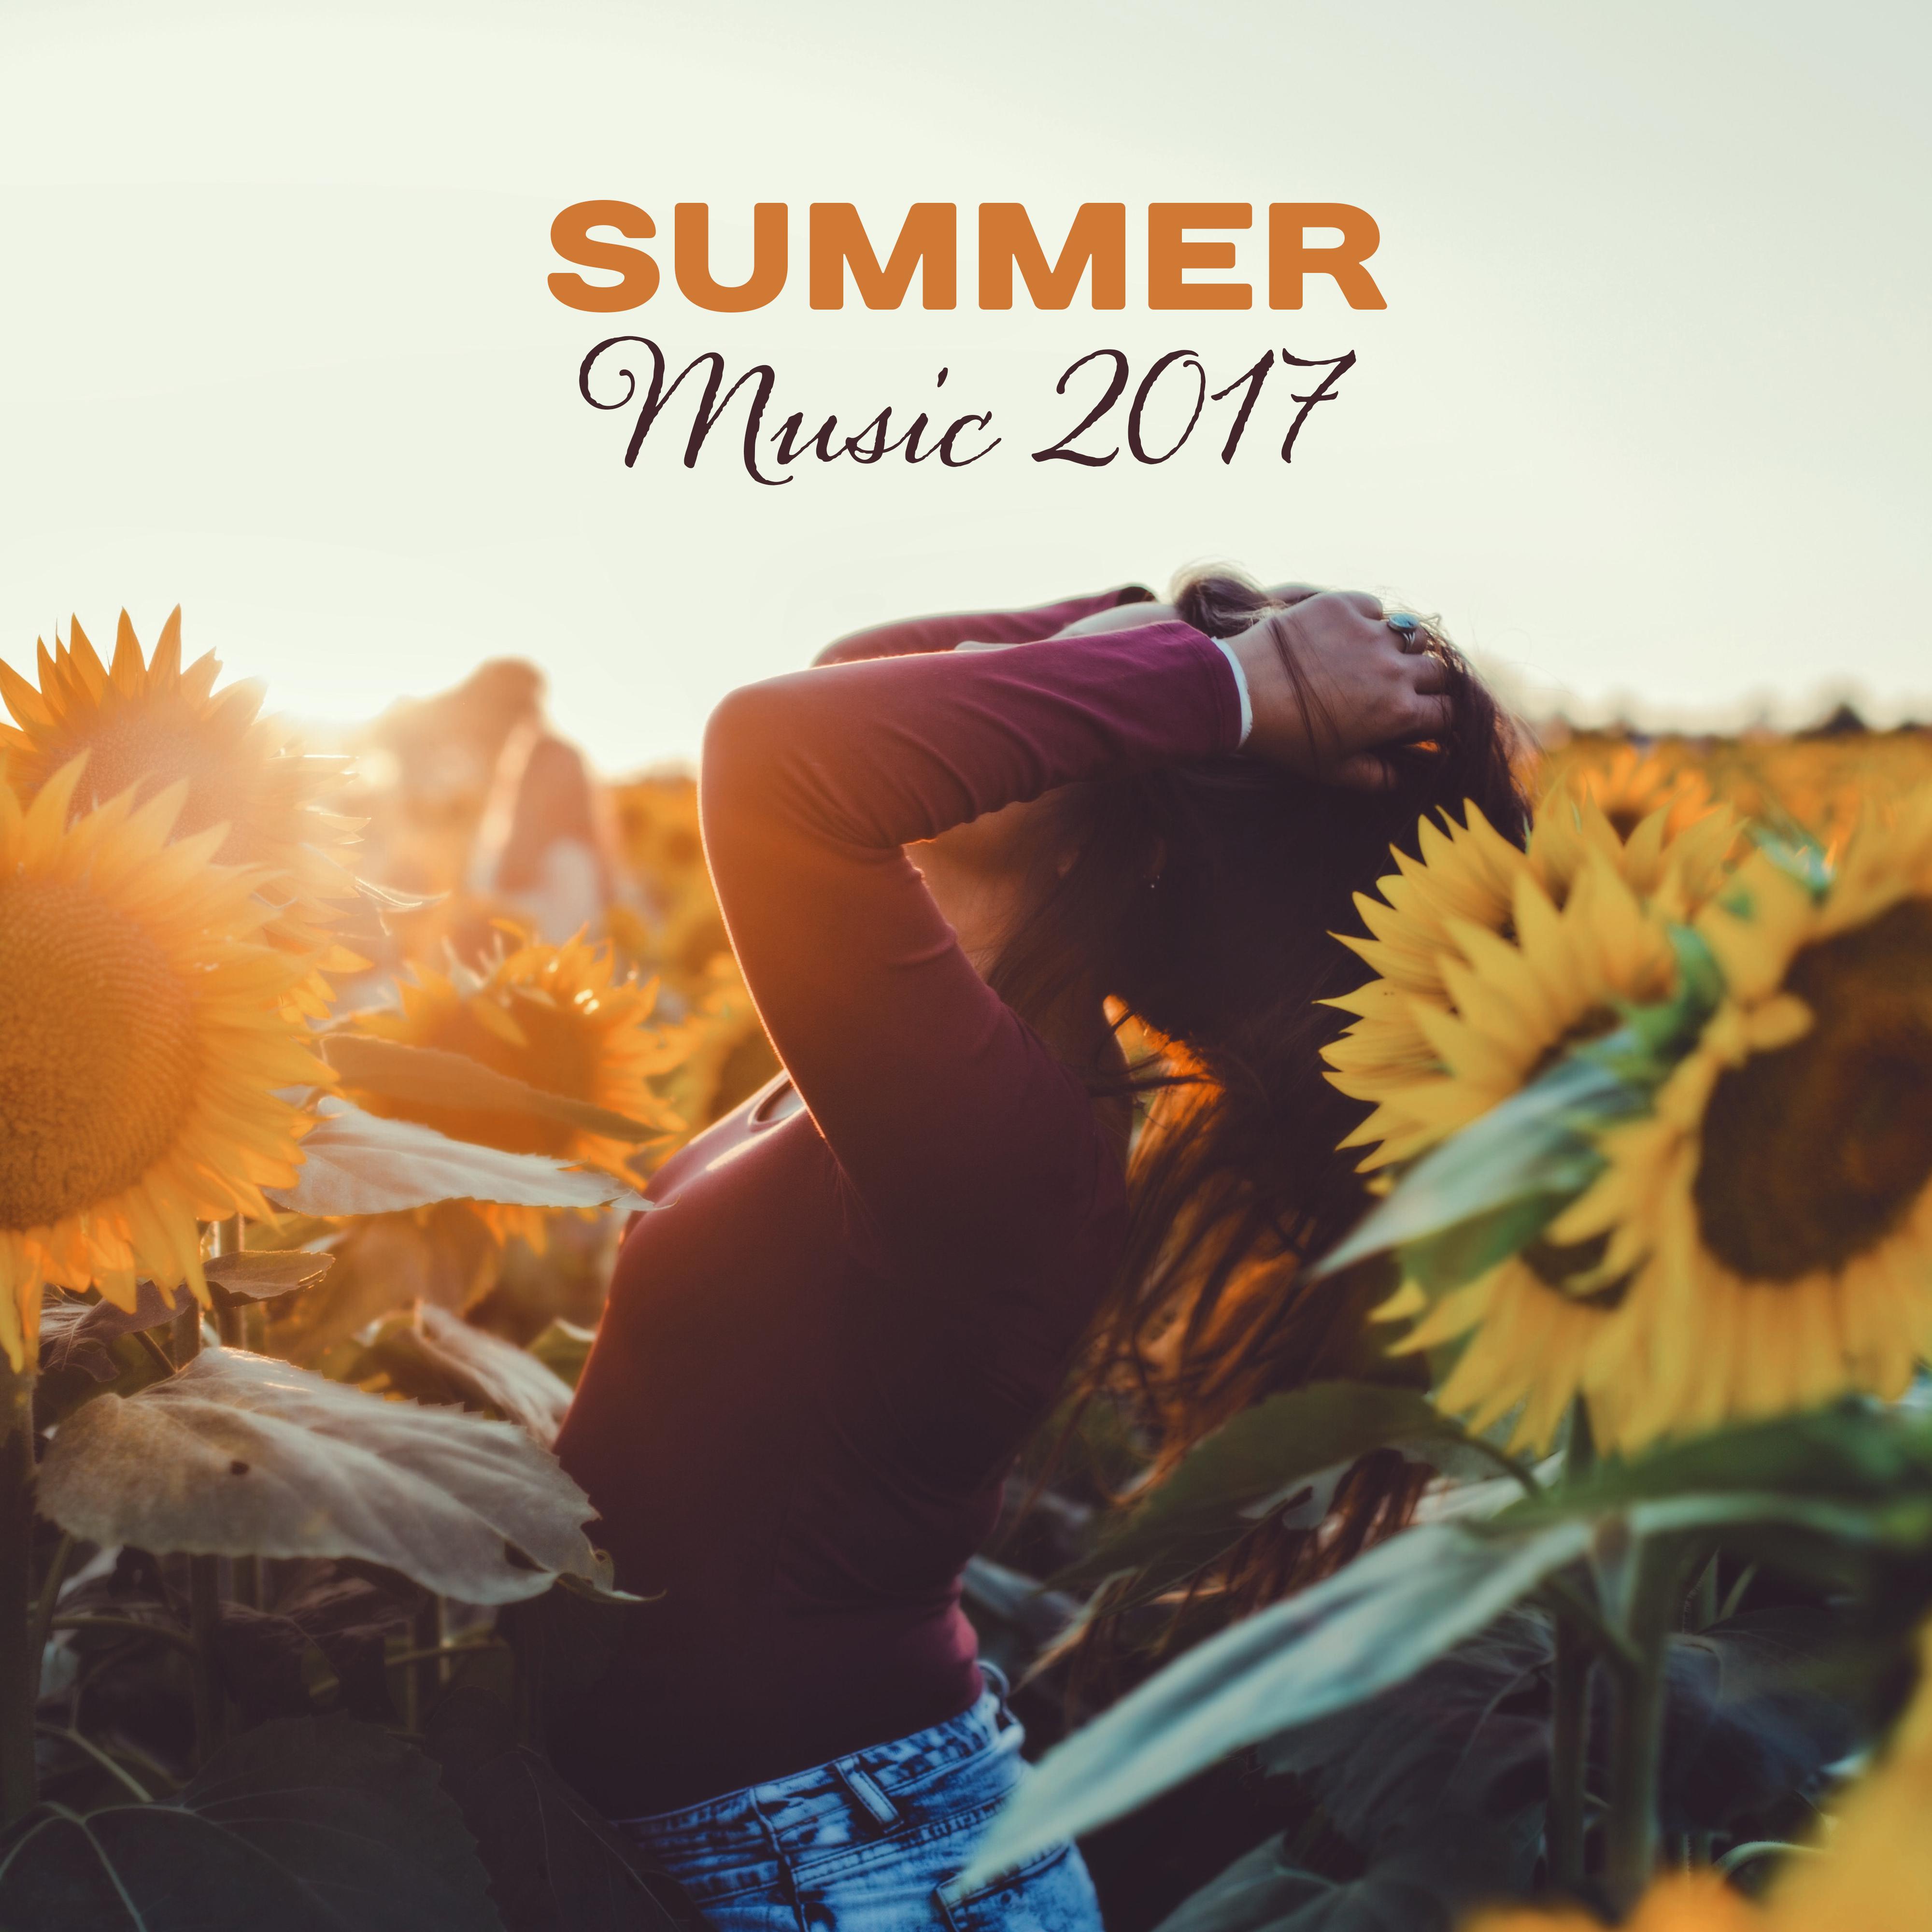 Summer Music 2017 – Holiday Hits, Relaxing Summer, Calm Sounds to Rest, Tropical Island